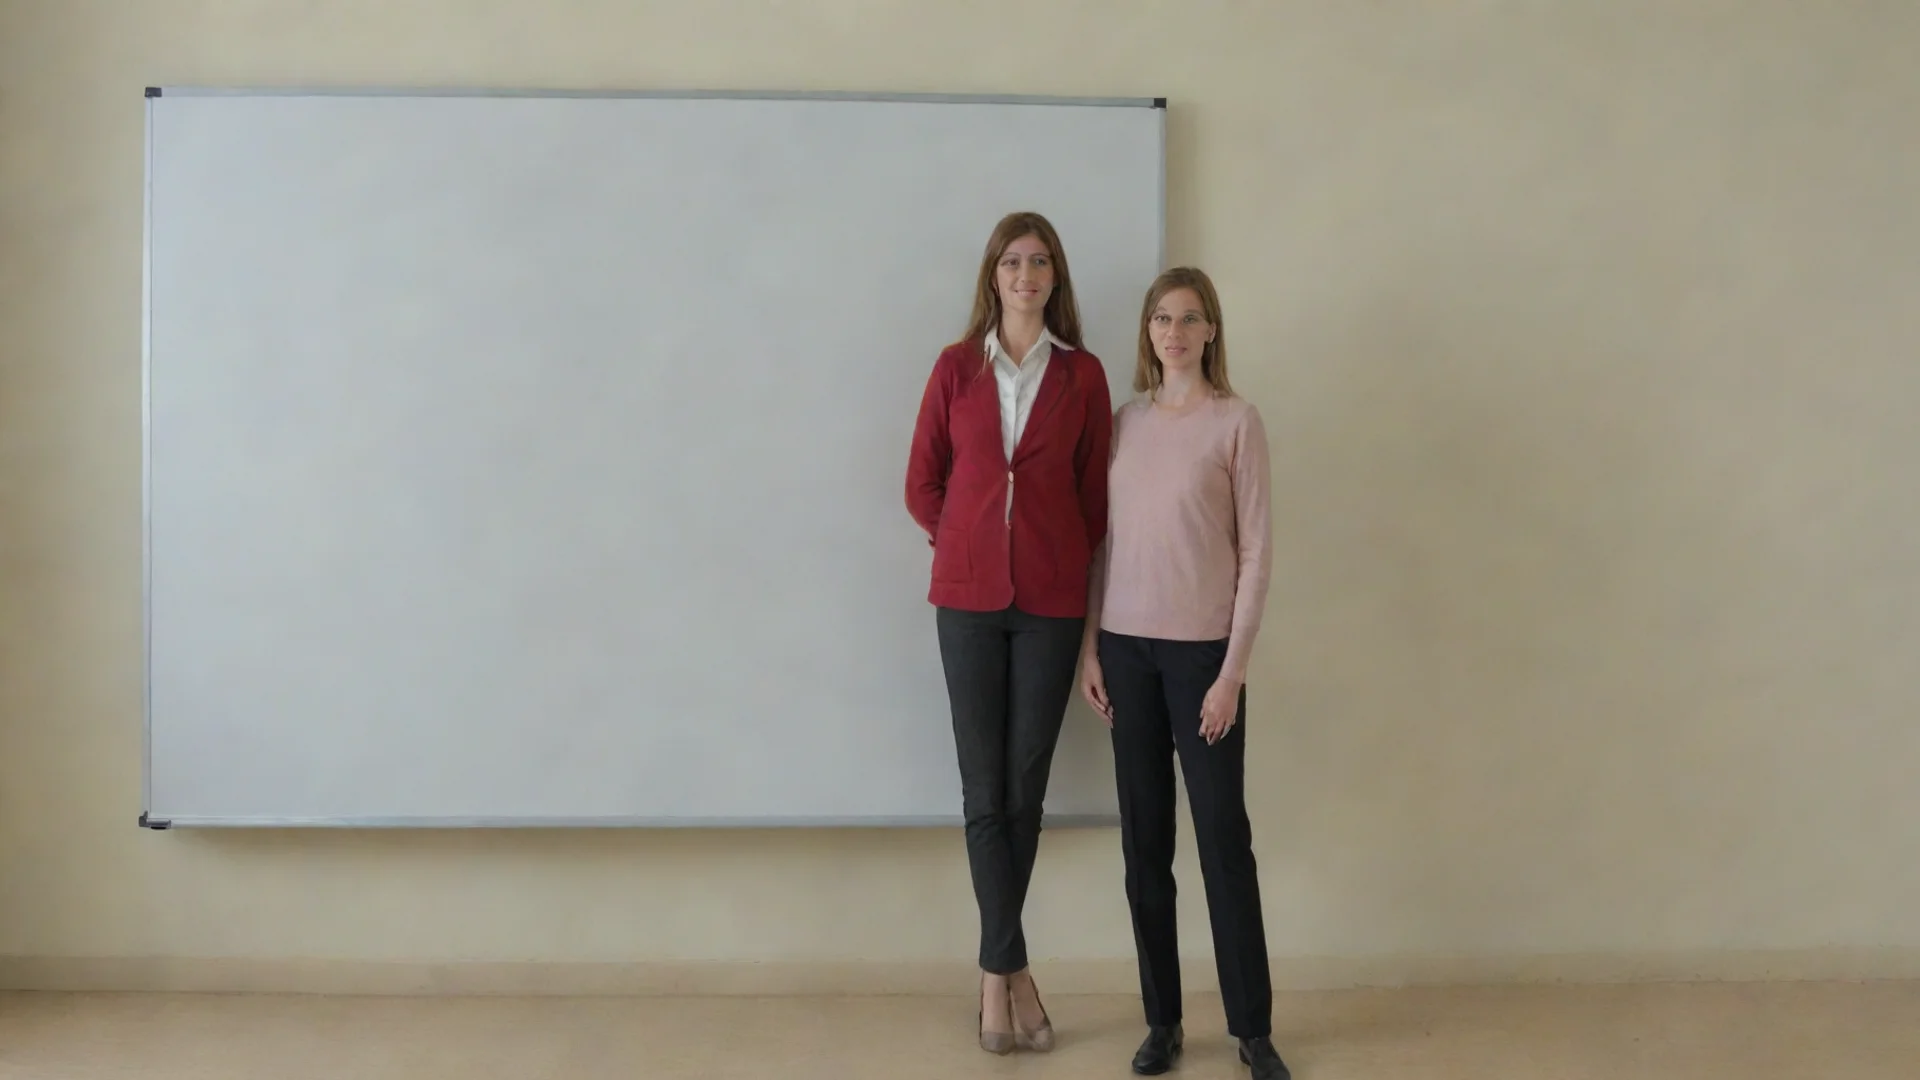 aiamazing blank board that covers the intire image. a teacher stand beside the board. the board cannot be covered by anything awesome portrait 2 hdwidescreen